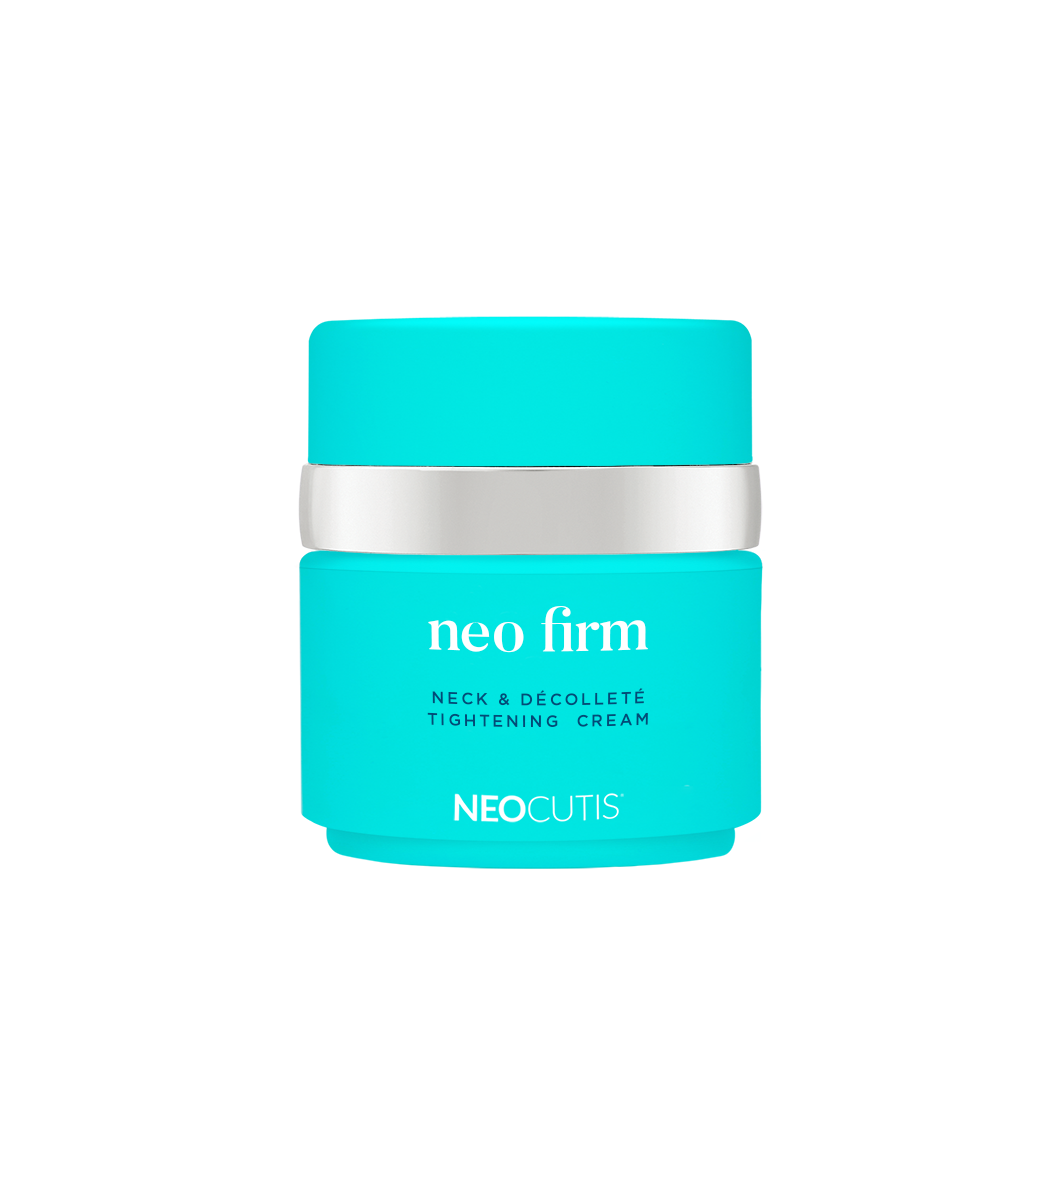 NEO FIRM: Anti-Aging Decollete & Neck Firming Skin Care